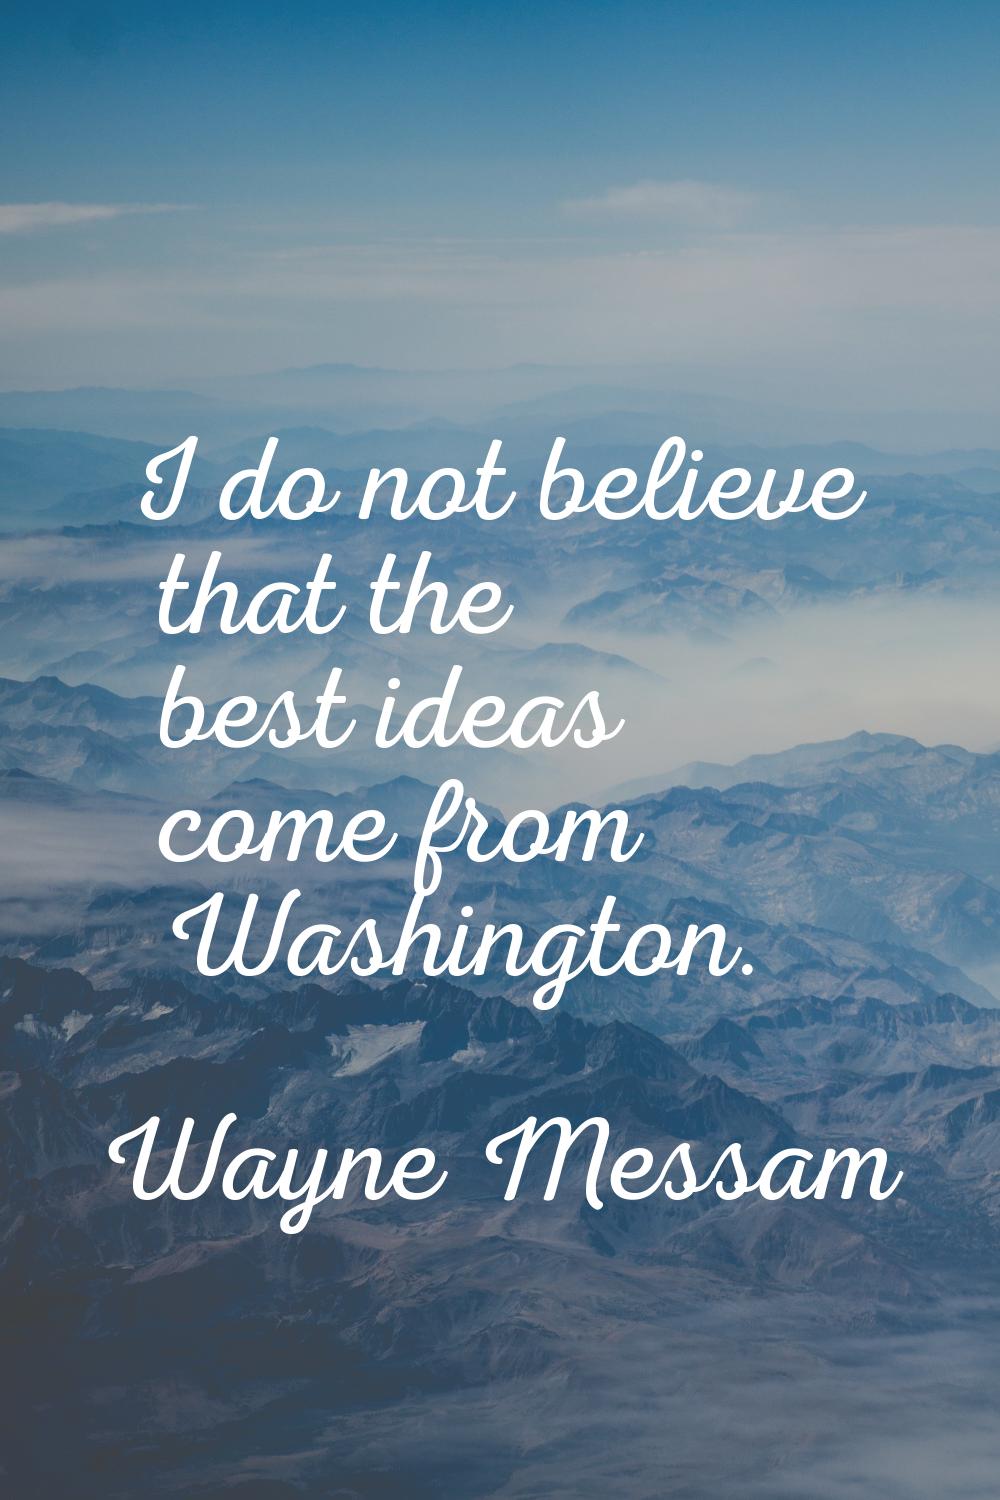 I do not believe that the best ideas come from Washington.